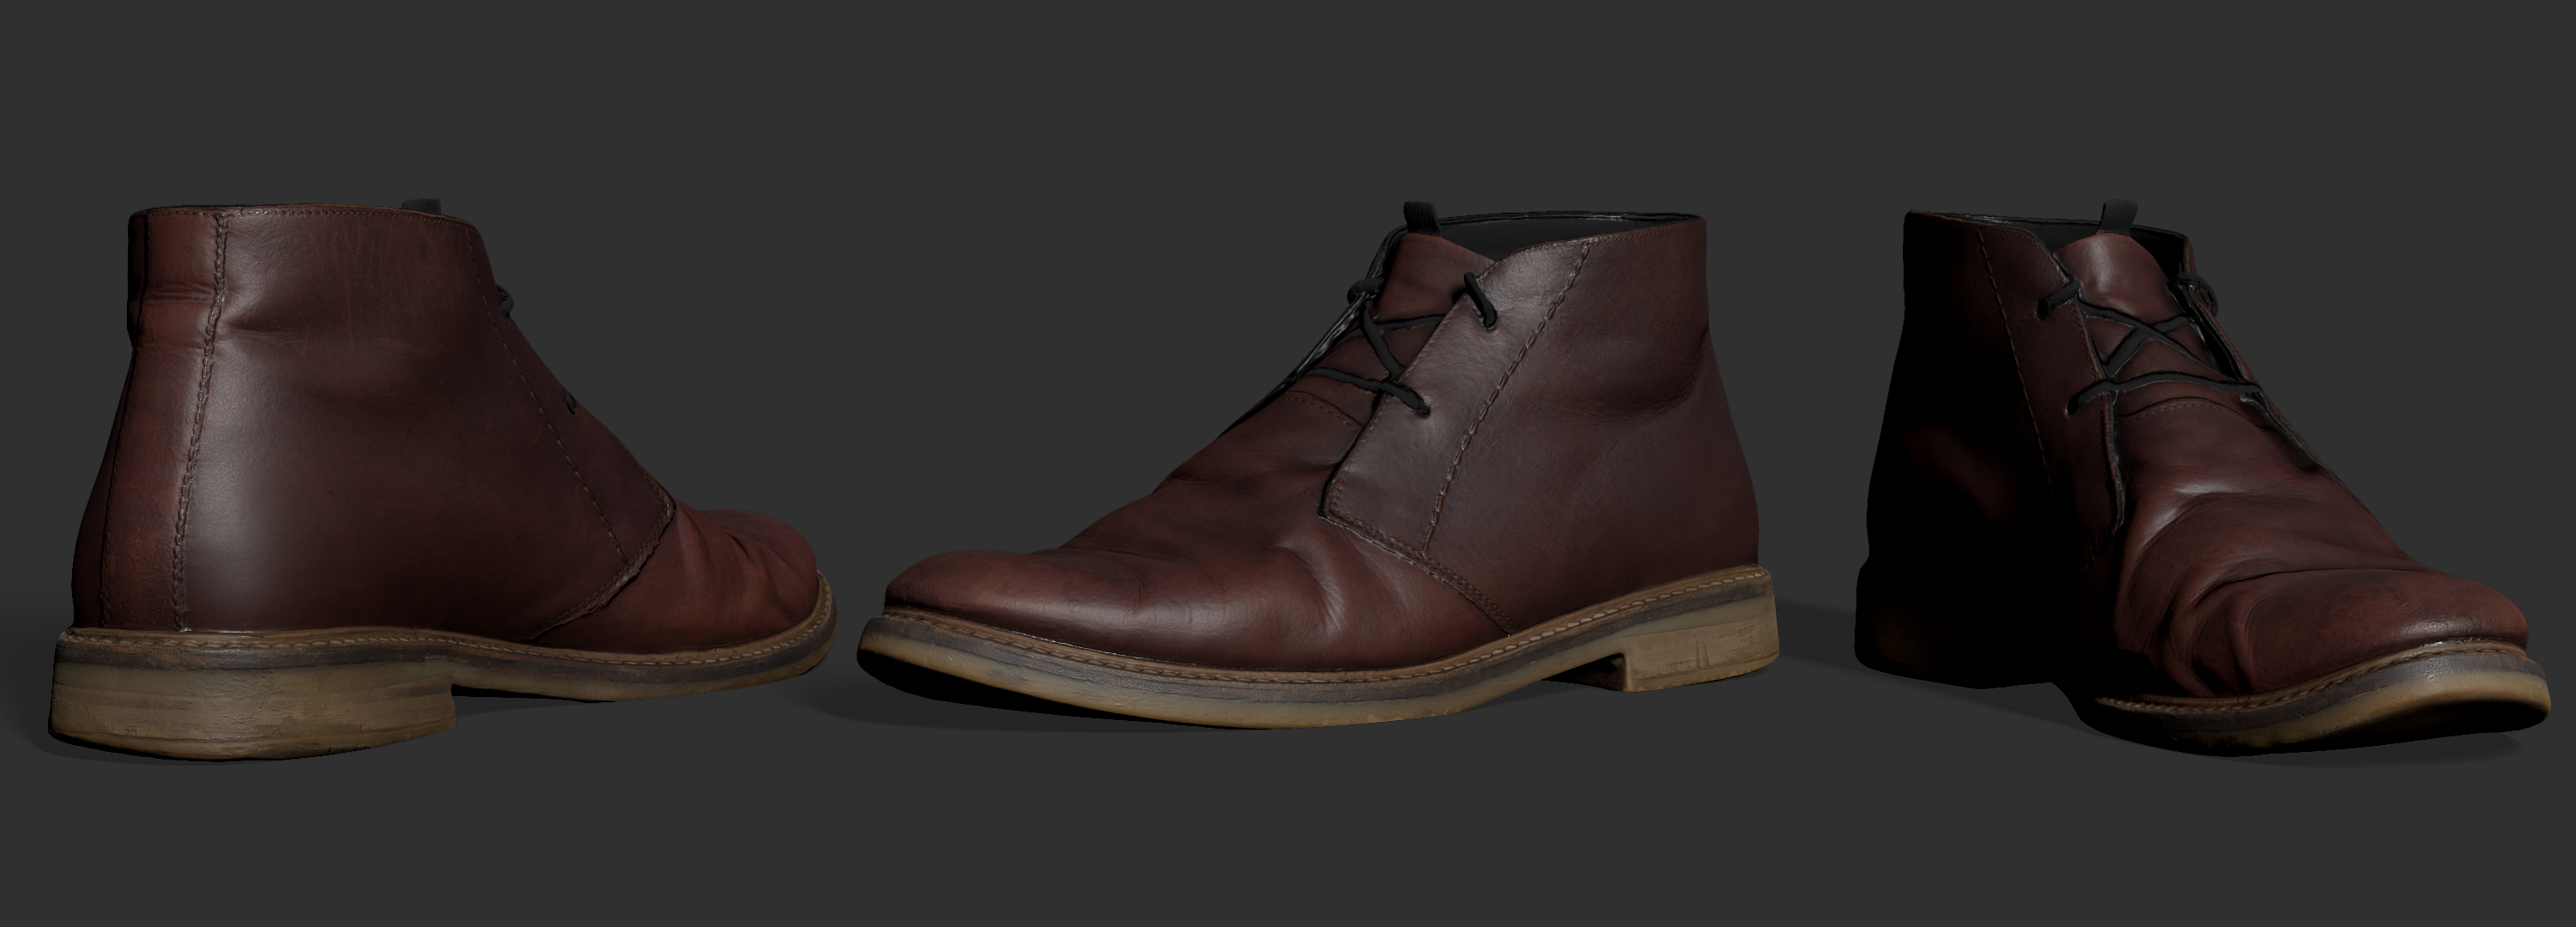 Leather boot 3d model download